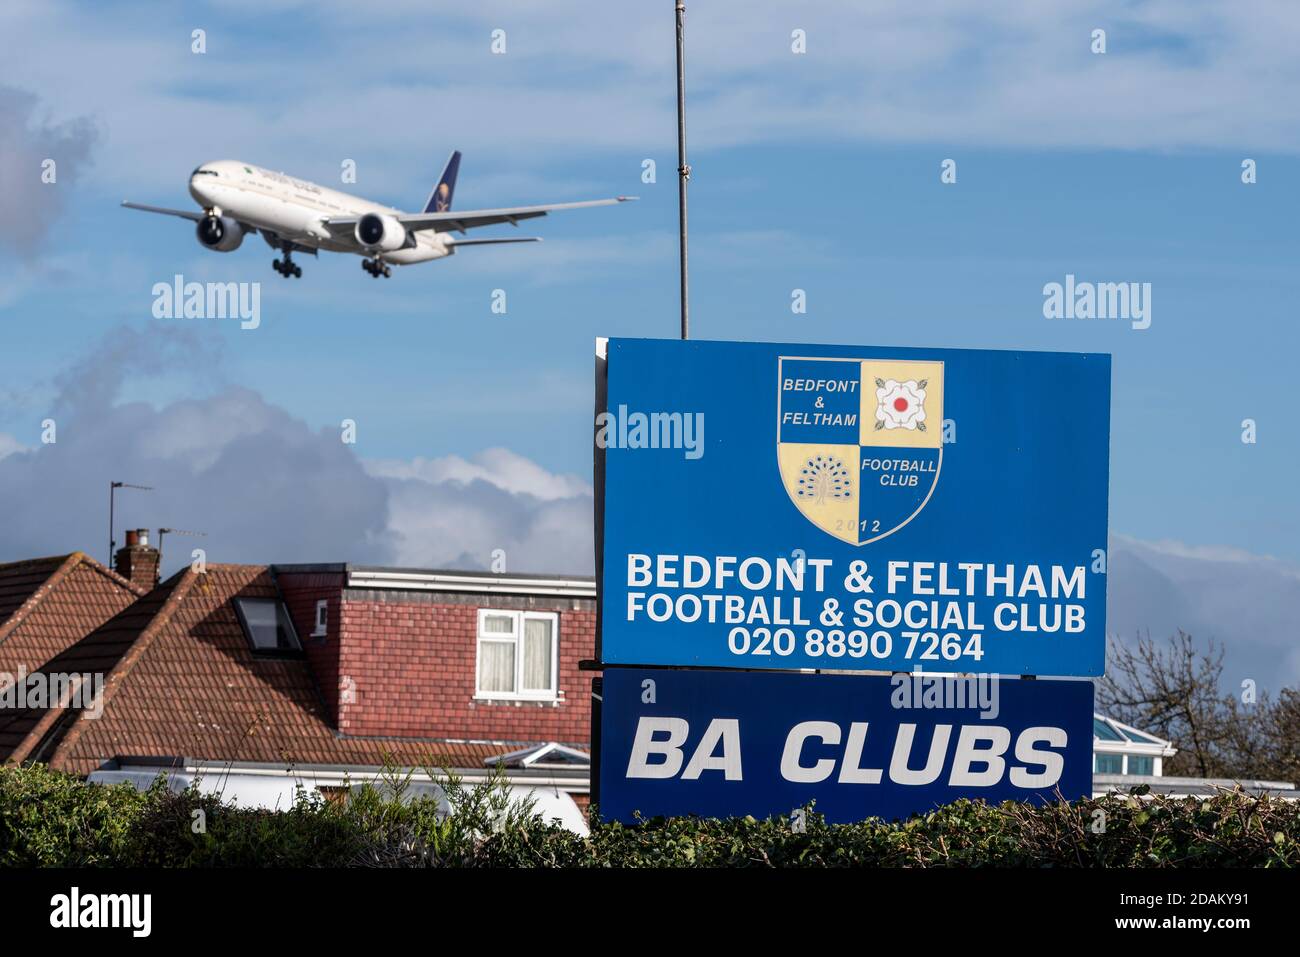 Jet airliner plane on approach to land at London Heathrow Airport, UK, over Bedfont & Feltham Football & Social Club. BA Clubs. Low over house Stock Photo